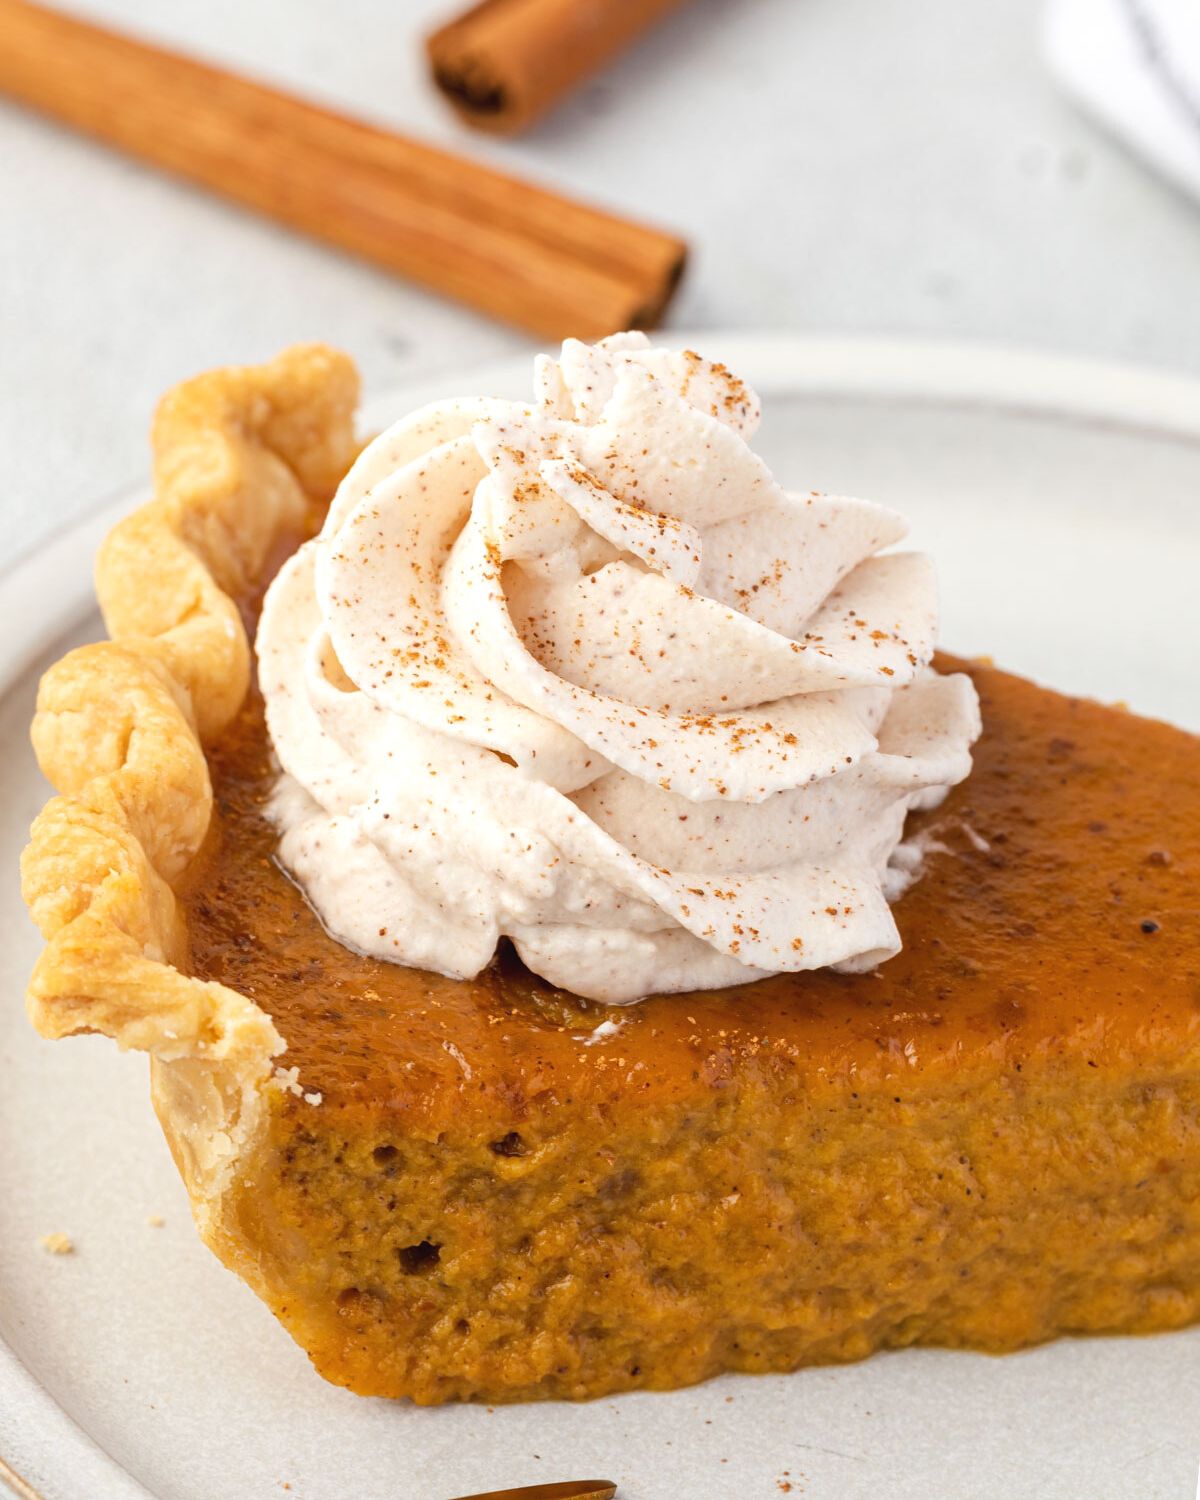 Spiced whipped cream on a slice of pumpkin pie with cinnamon sticks in background.